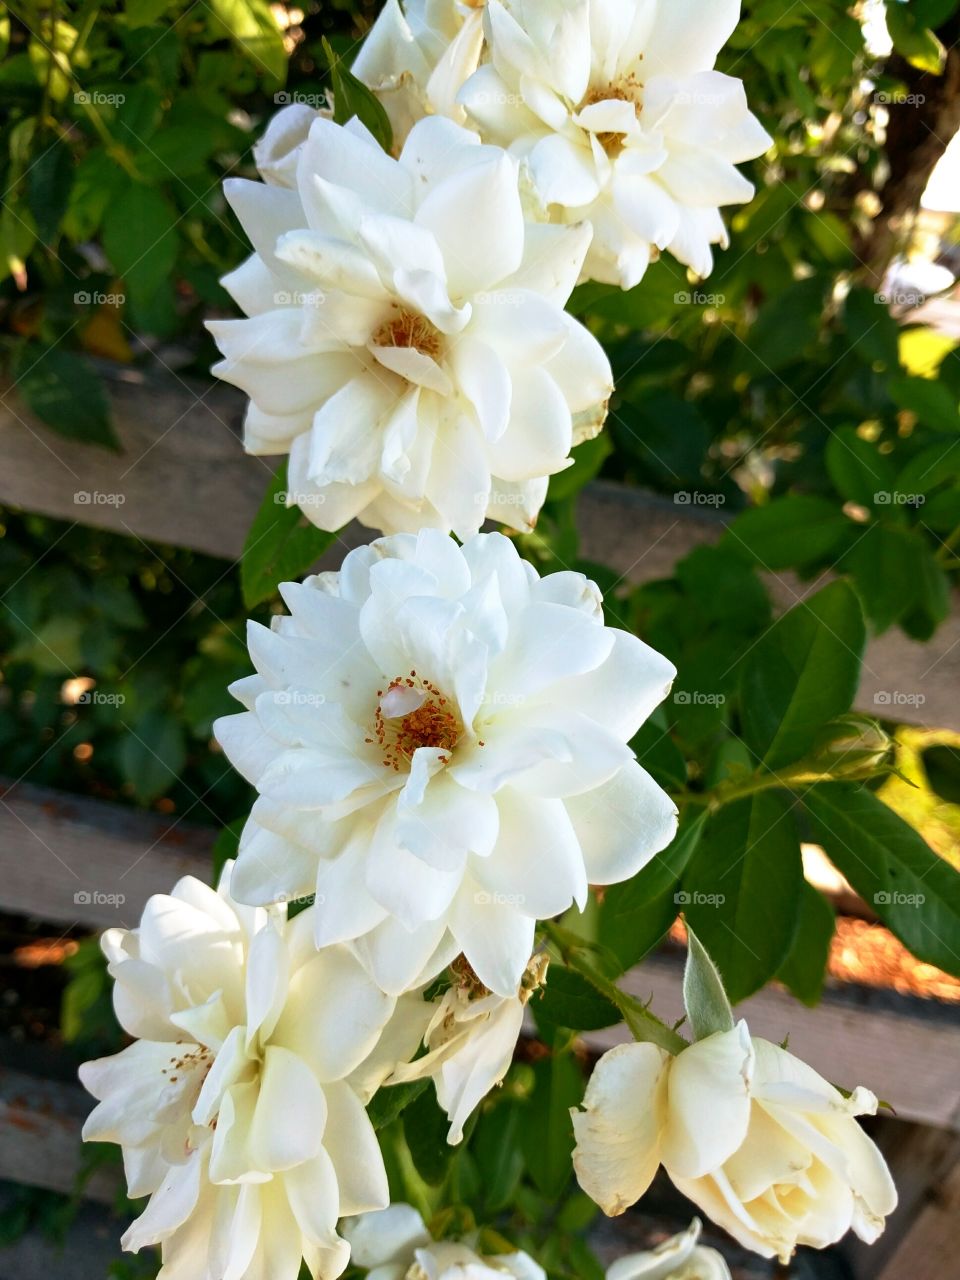 White Roses through a Wooden Fence